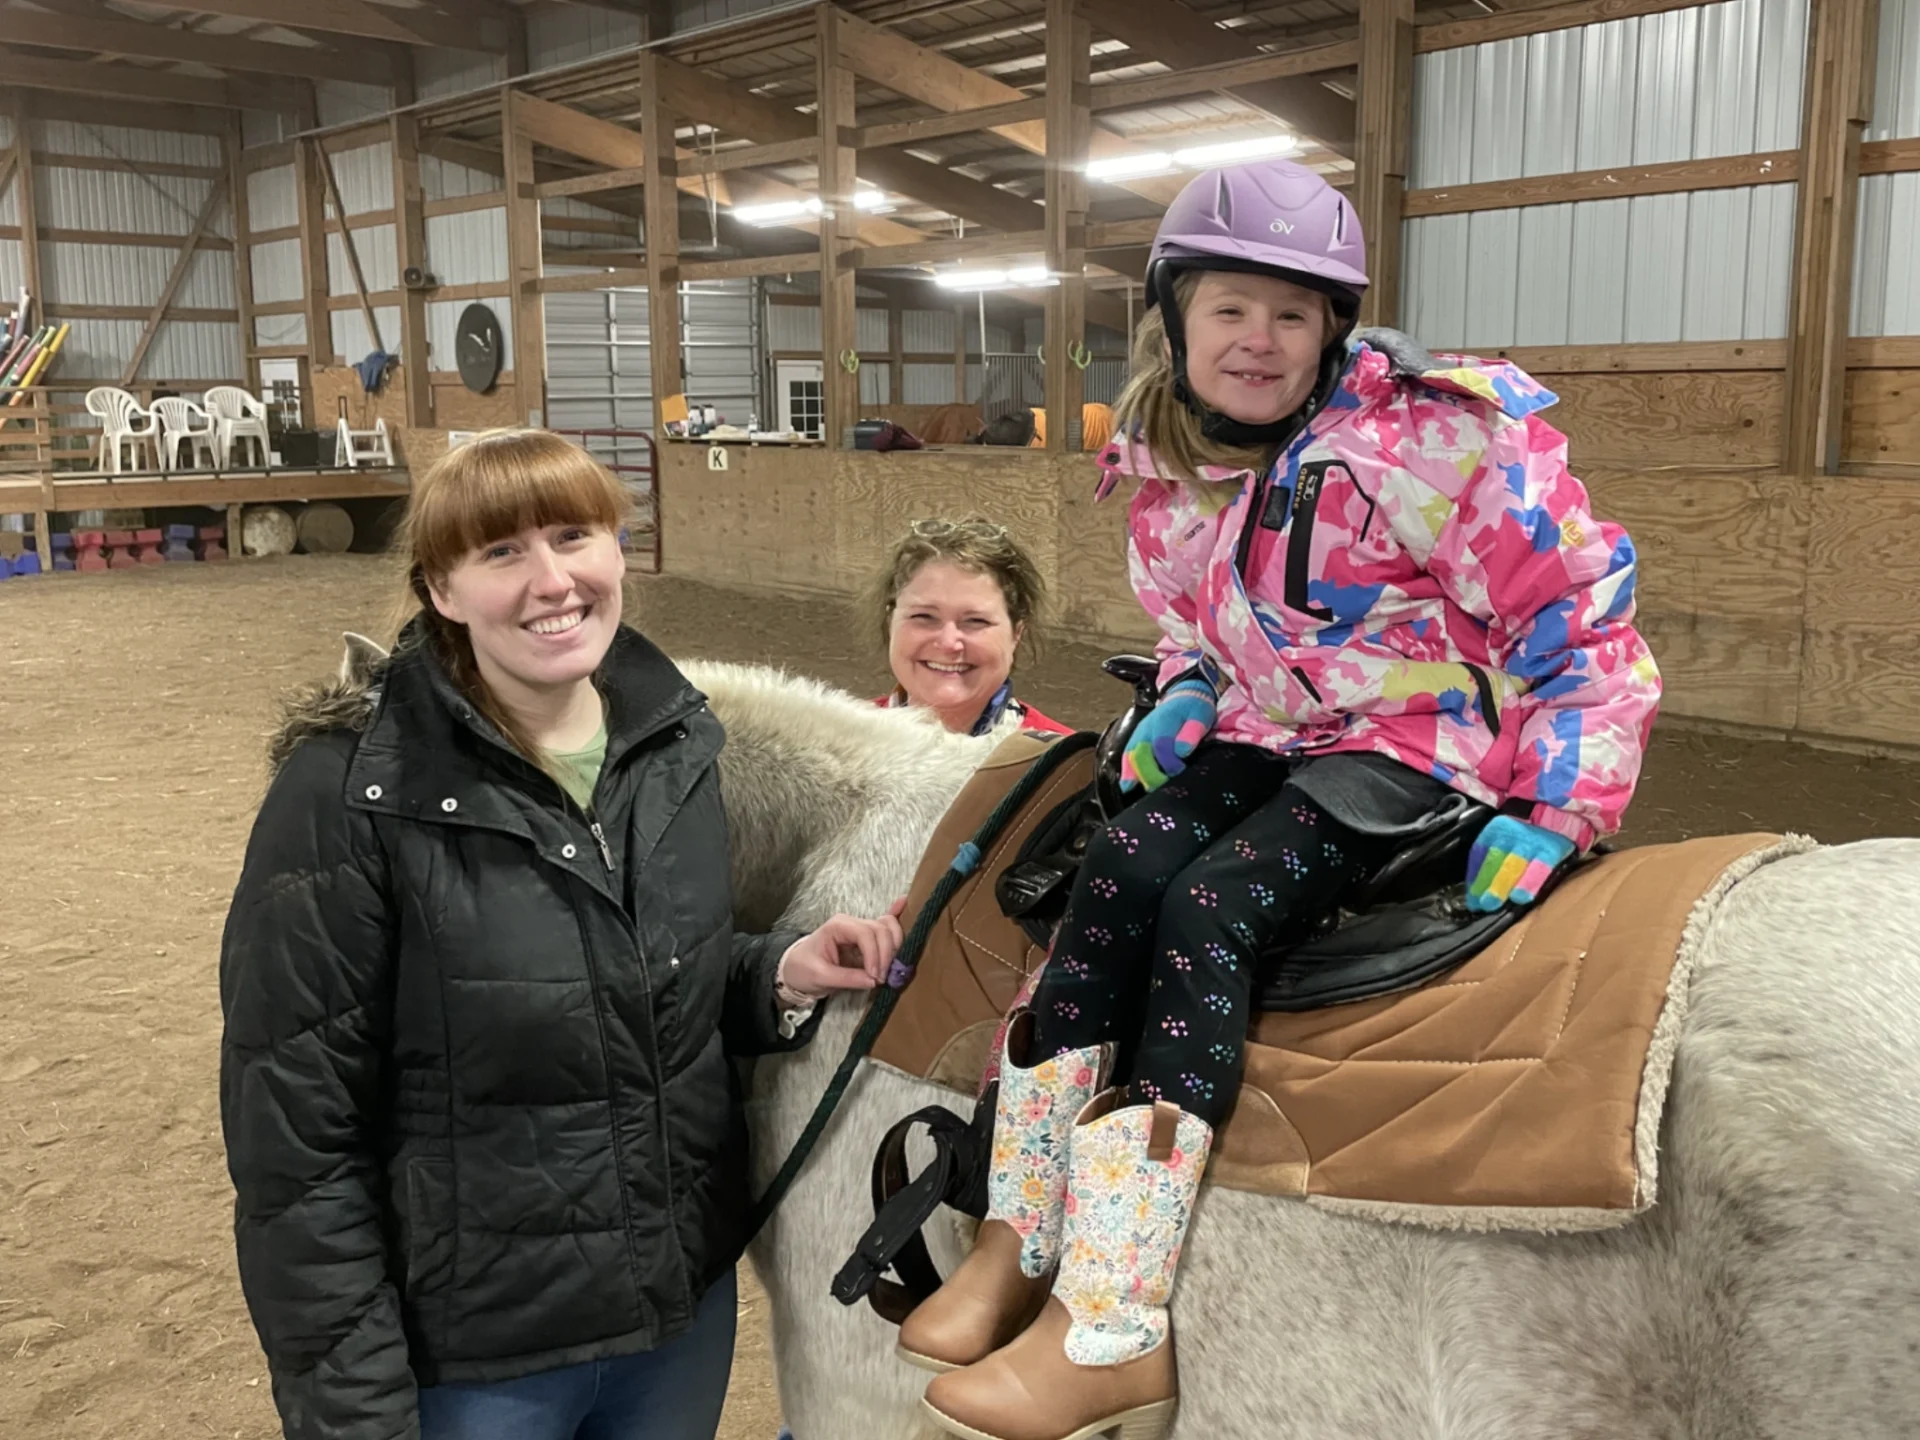 Three women are sitting on a horse in an indoor arena.